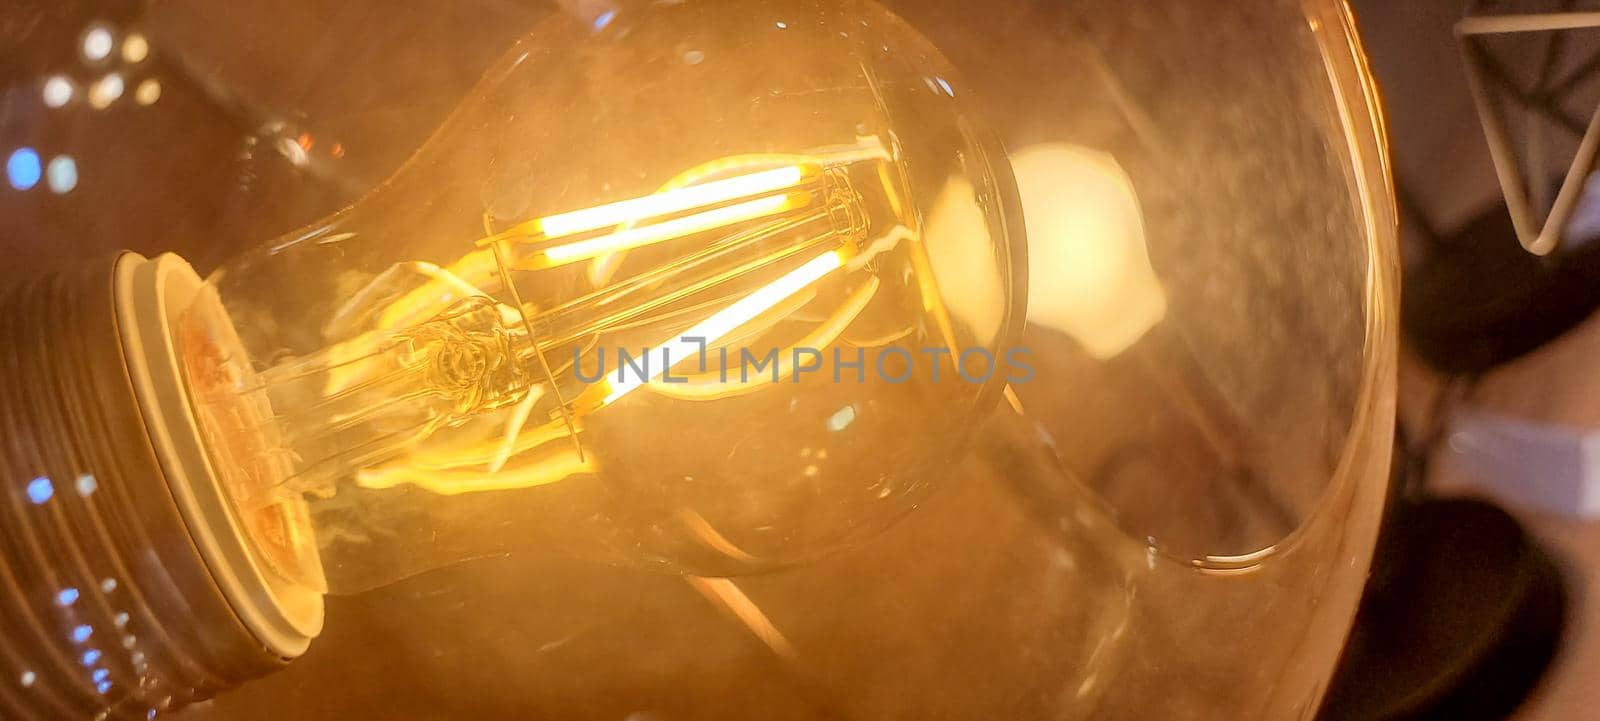 filament lighting with warm colors that can be used as a shadow background